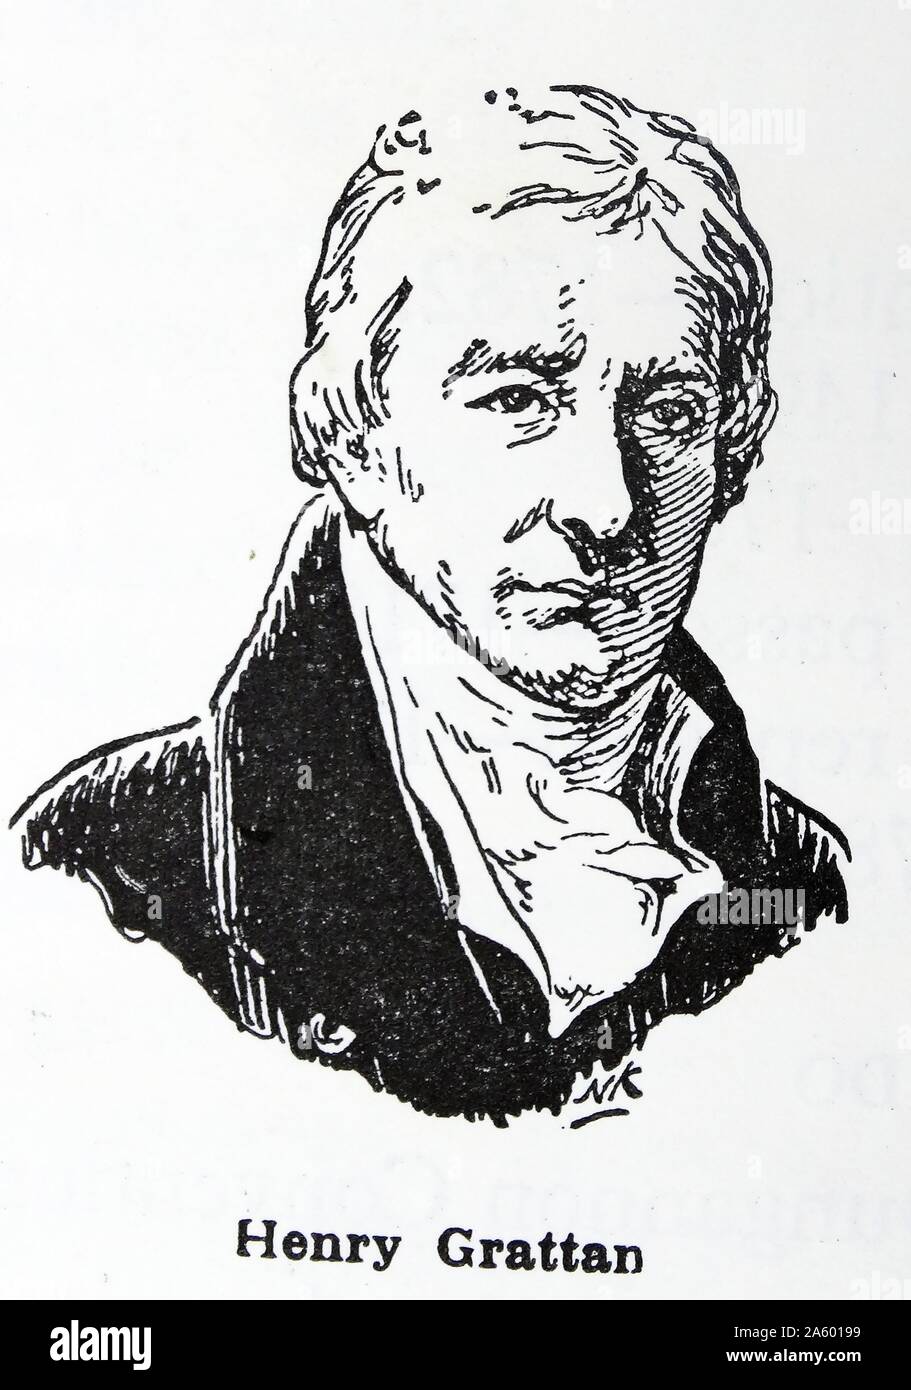 Henry Grattan (1746 – 1820) Irish politician and member of the Irish House of Commons and a campaigner for legislative freedom for the Irish Parliament in the late 18th century. Stock Photo